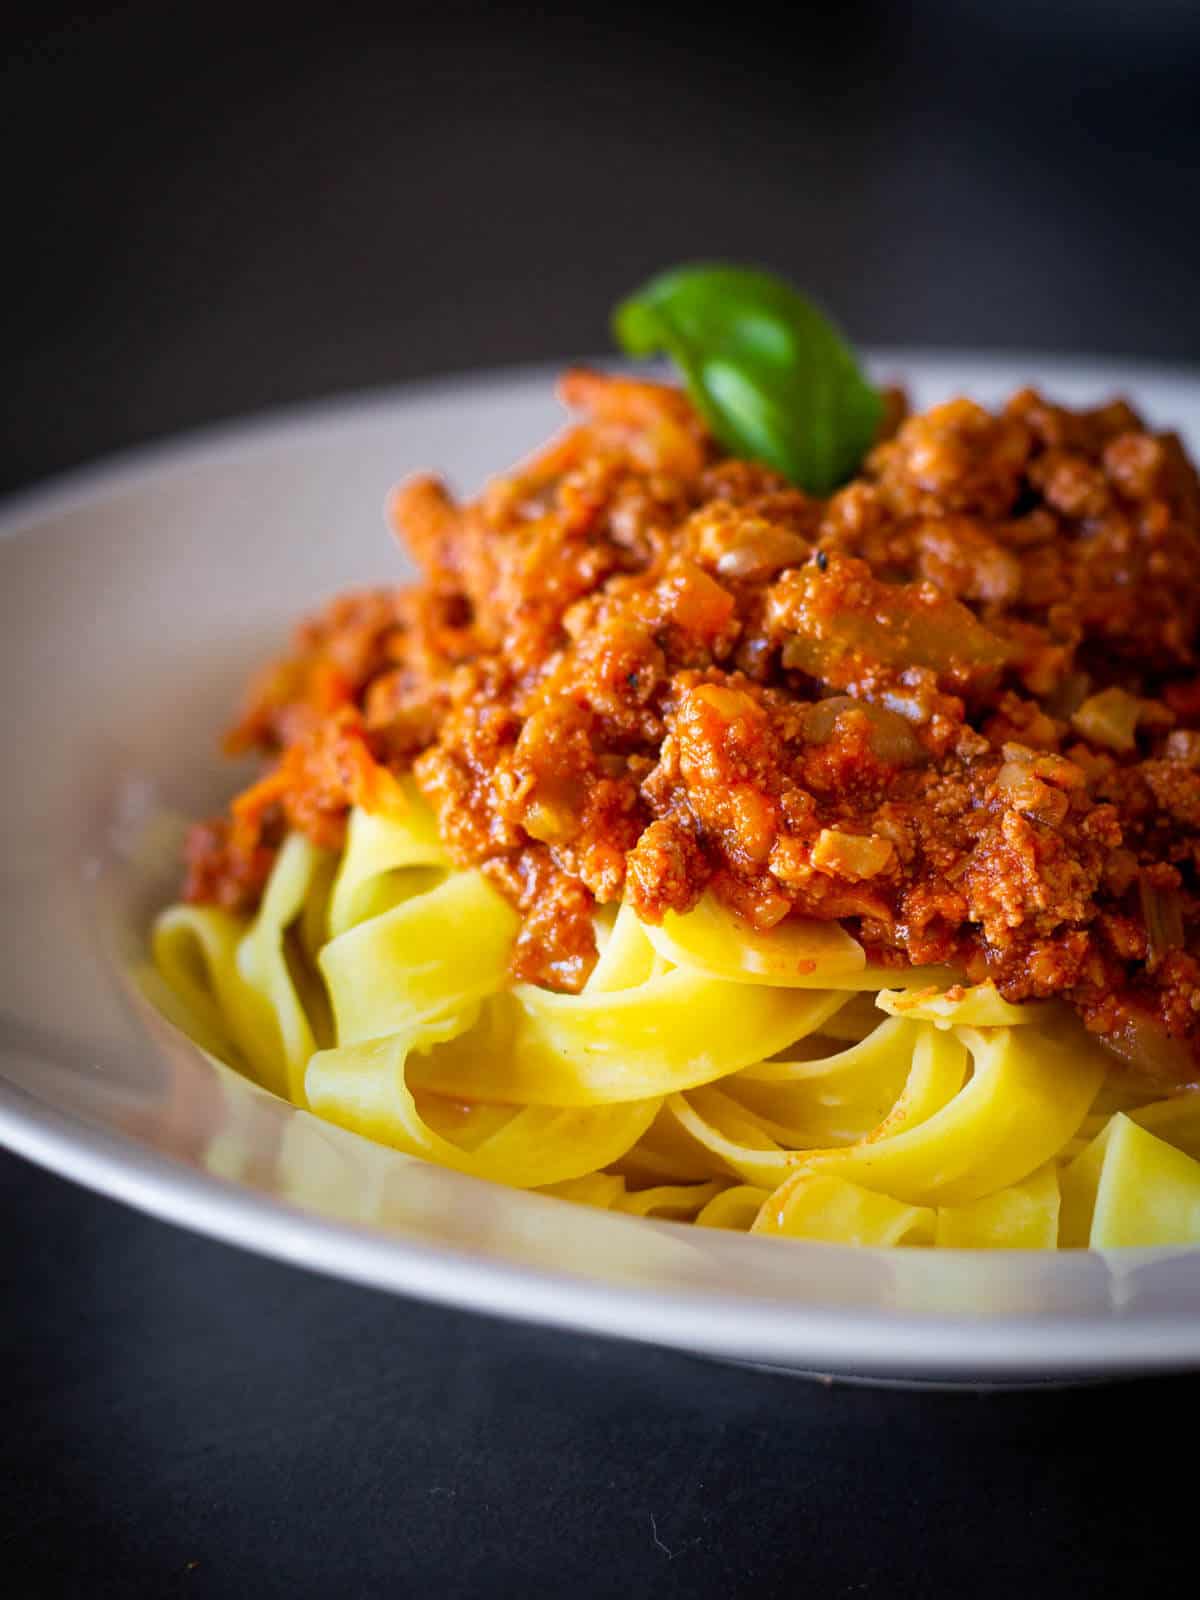 Vegan Bolognese sauce plated with fettuccini pasta.